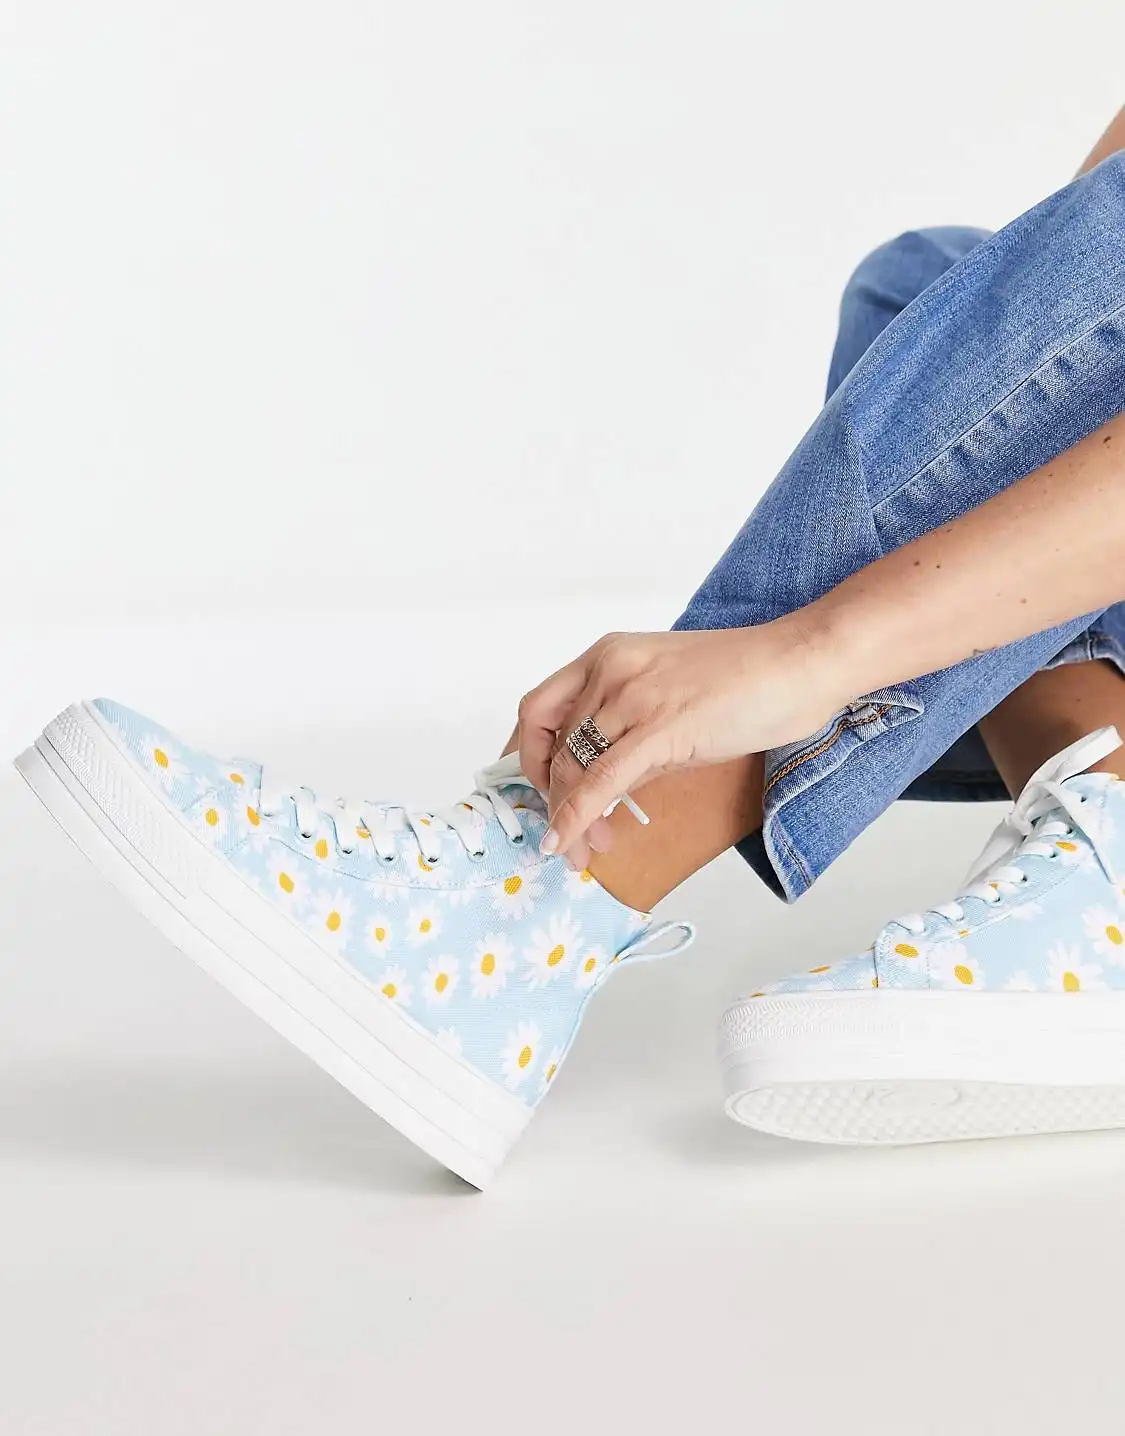 Daisy Street Exclusive High Top Sneakers in Daisy Print | ASOS